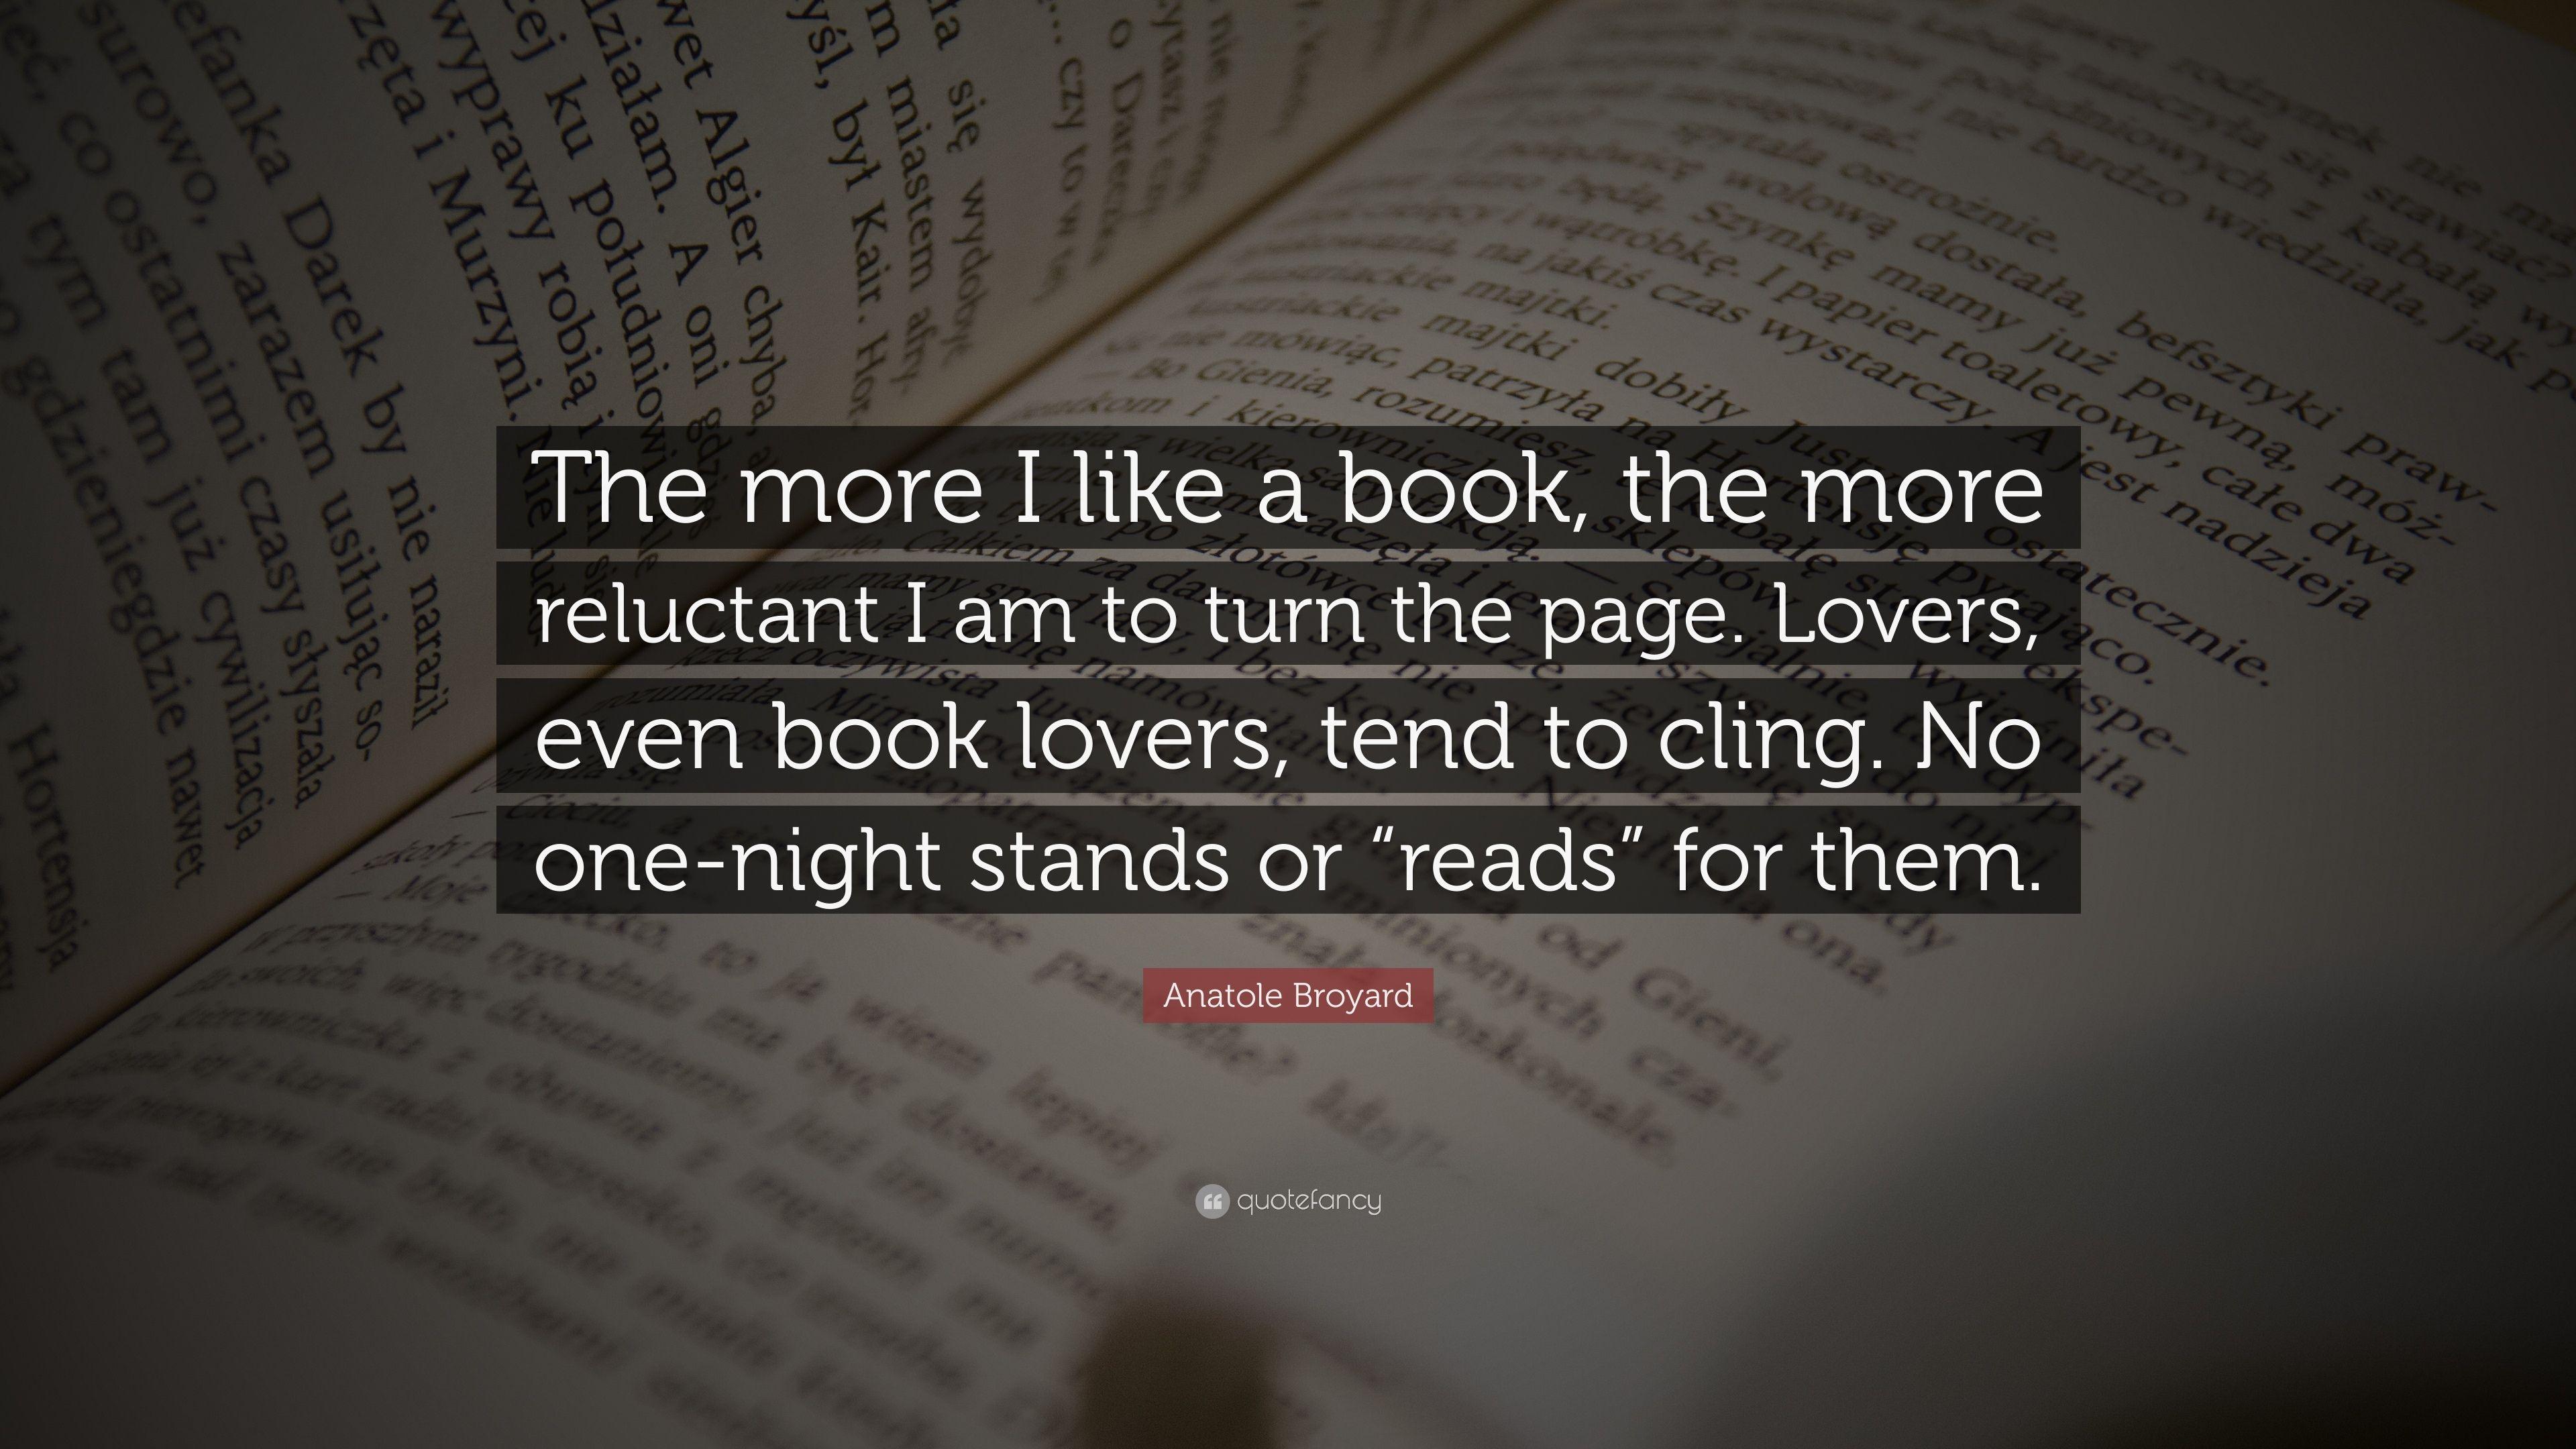 Anatole Broyard Quote: “The more I like a book, the more reluctant I